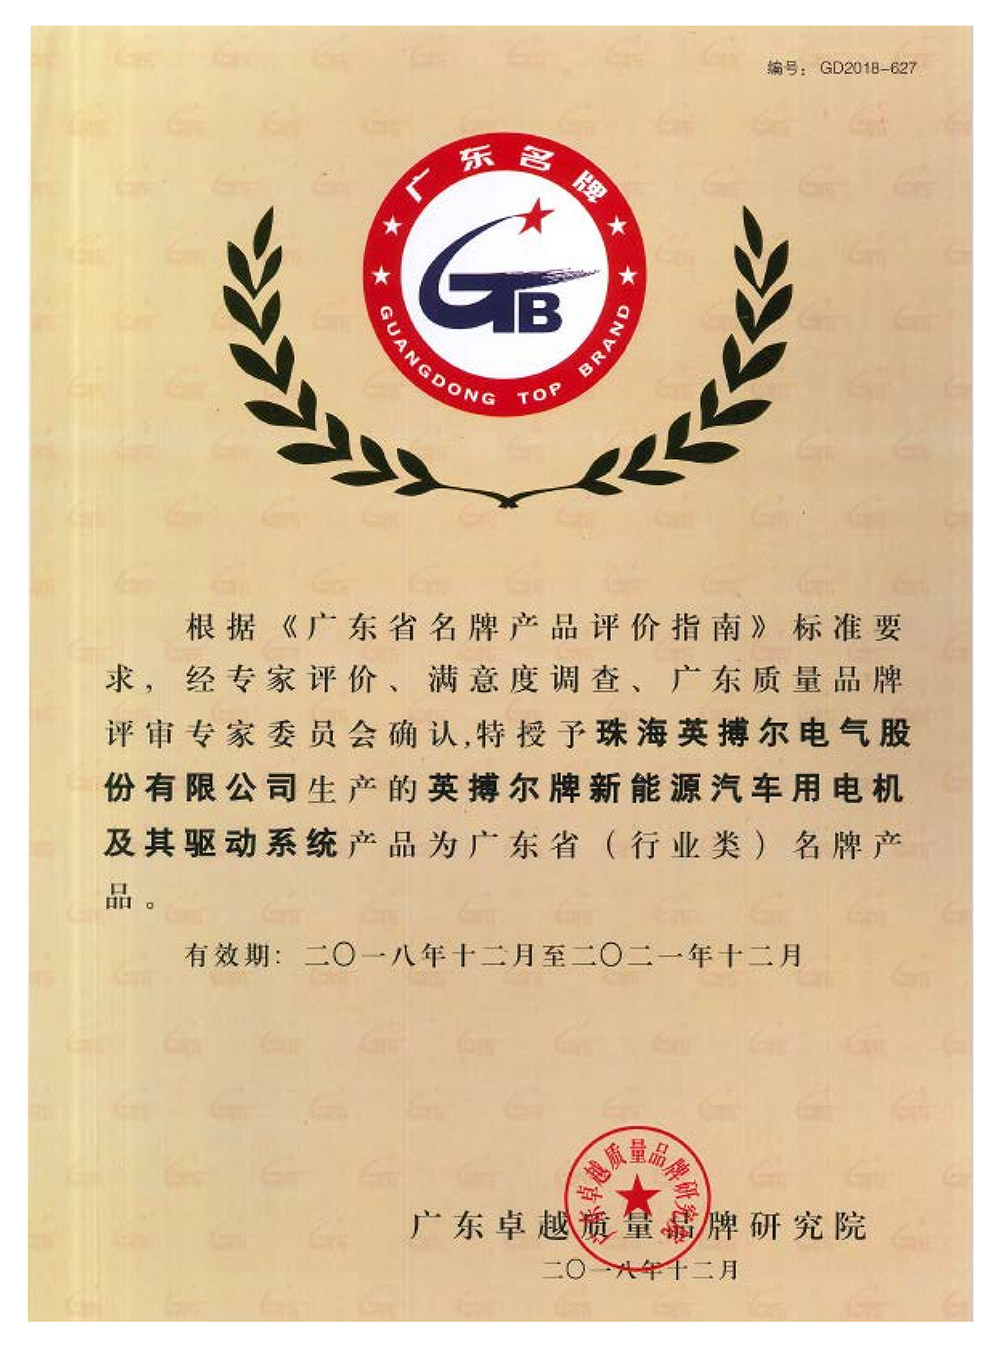 Famous-brand (Industrial) Products of Guangdong Province